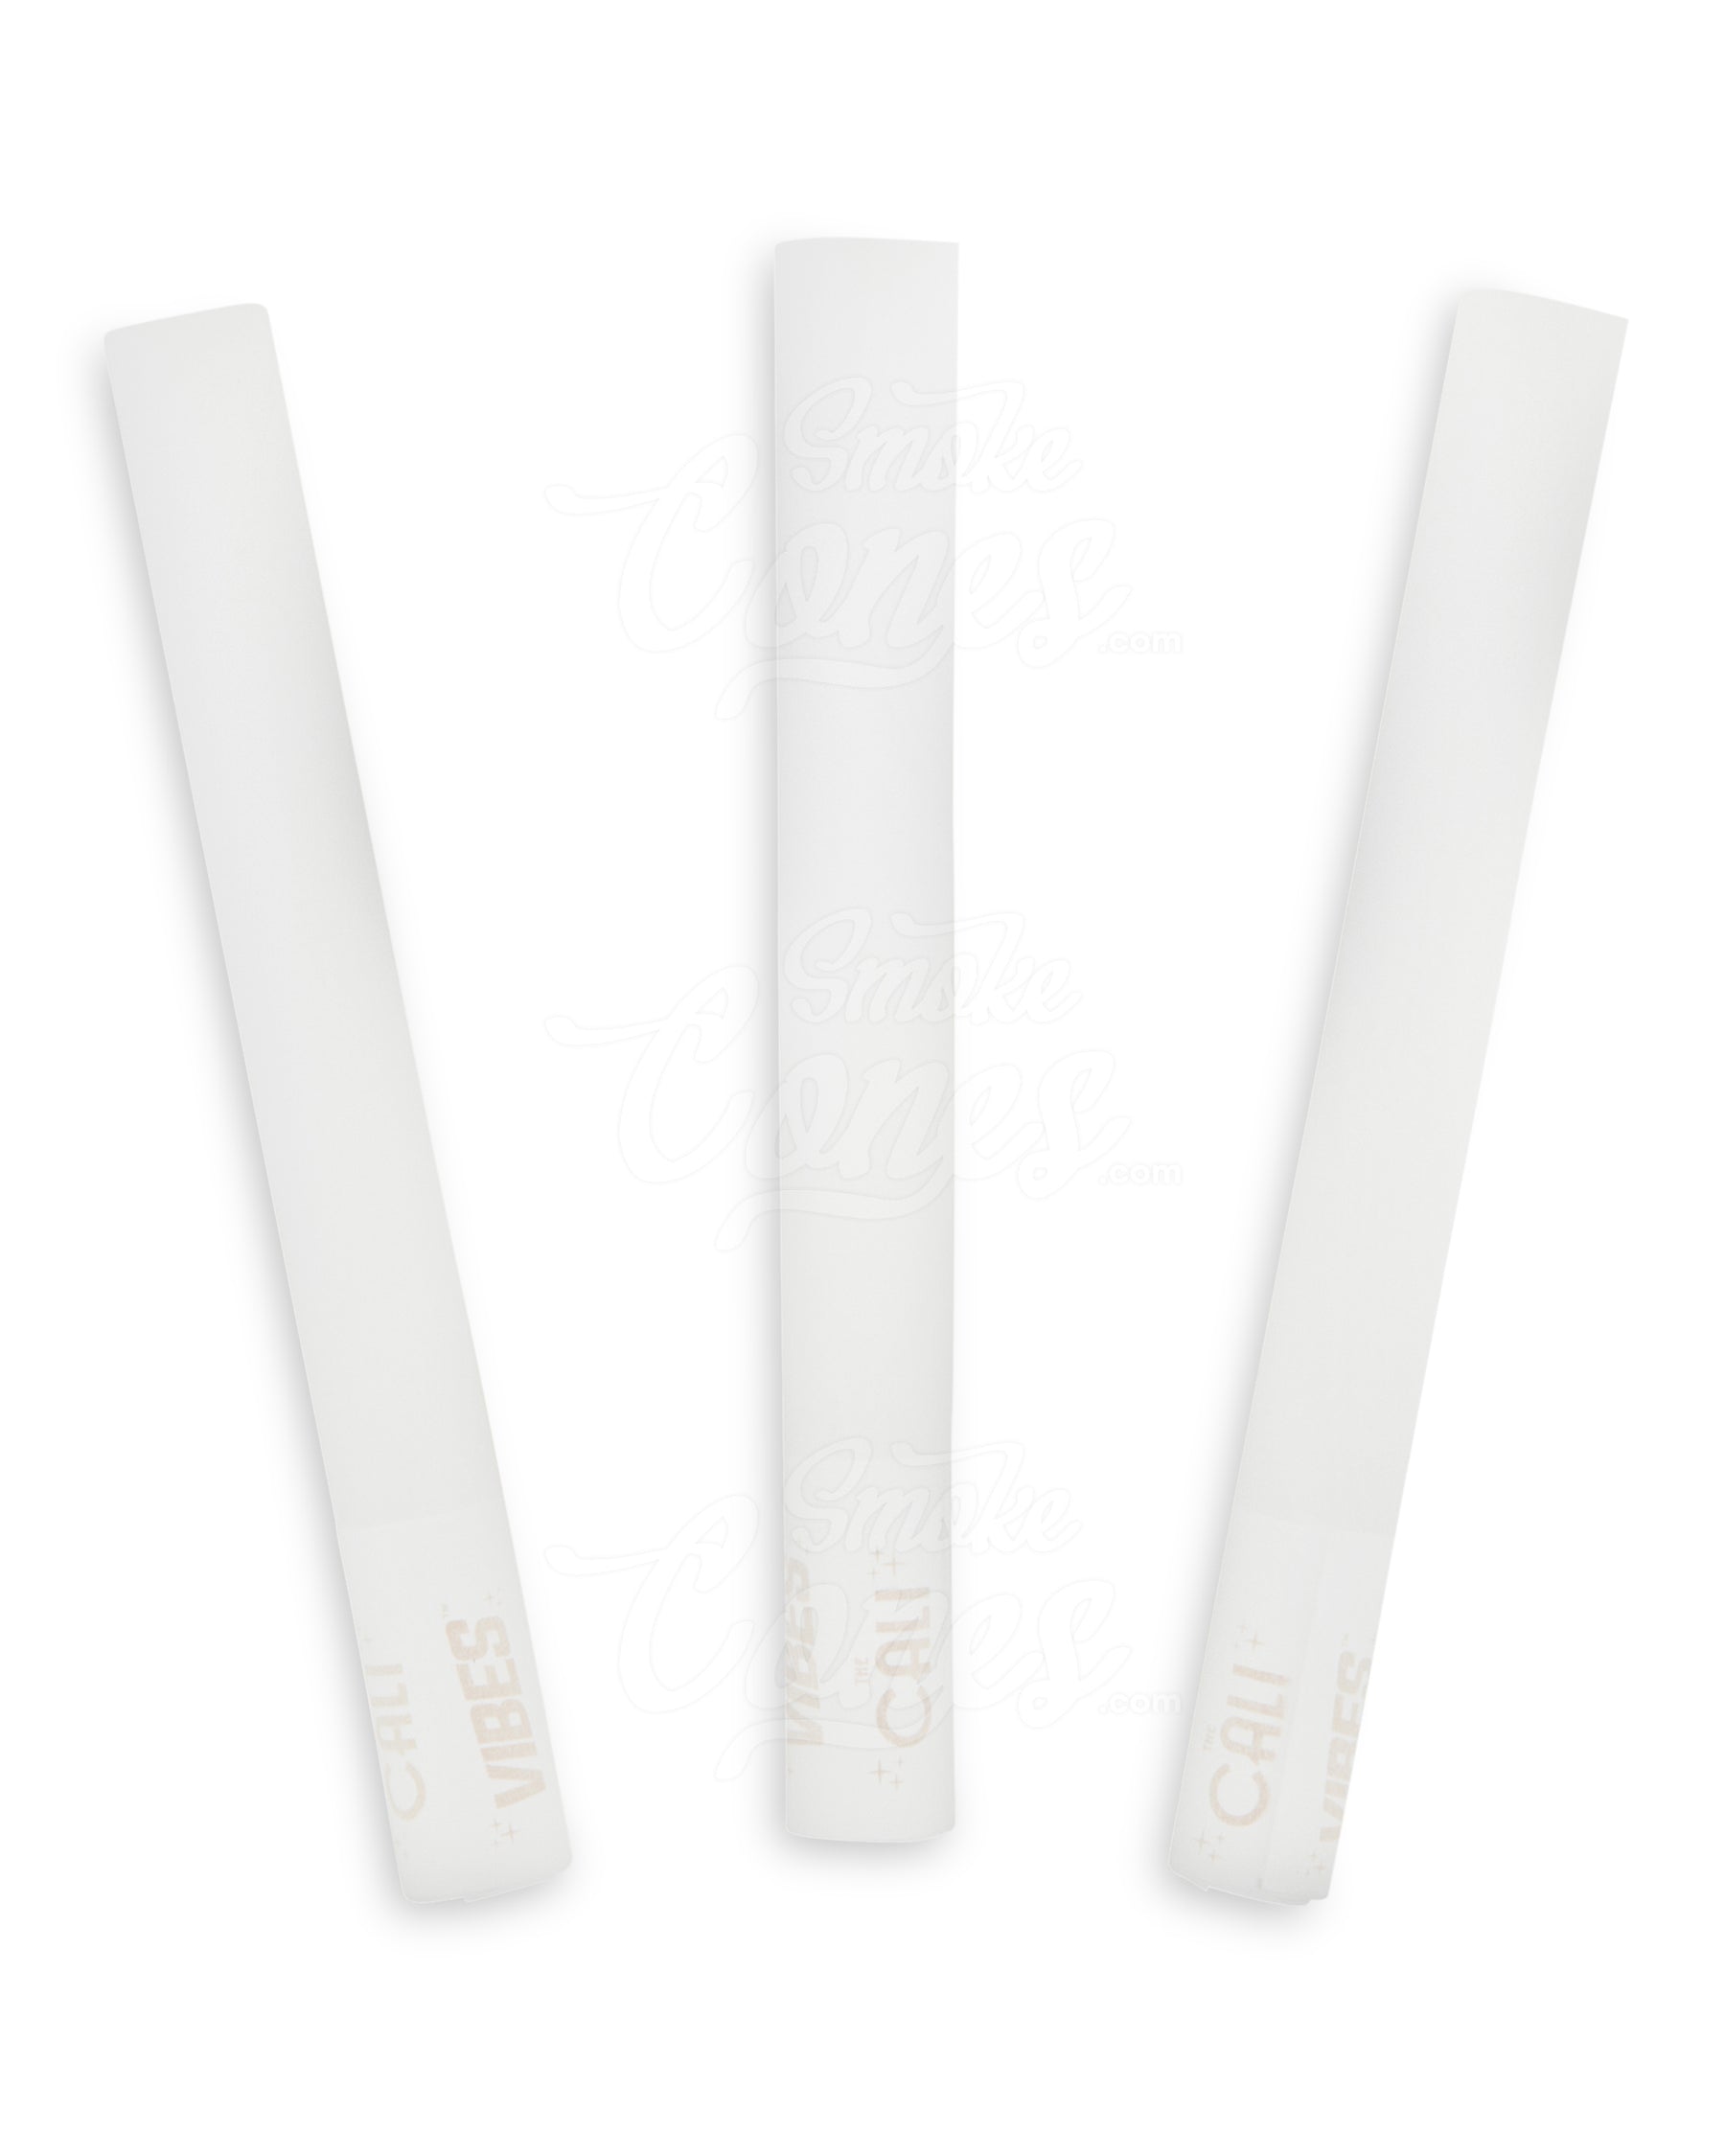 Vibes 110mm King Sized The Cali 1 Gram Pre Rolled Rice Paper Cones 24/Box - 5